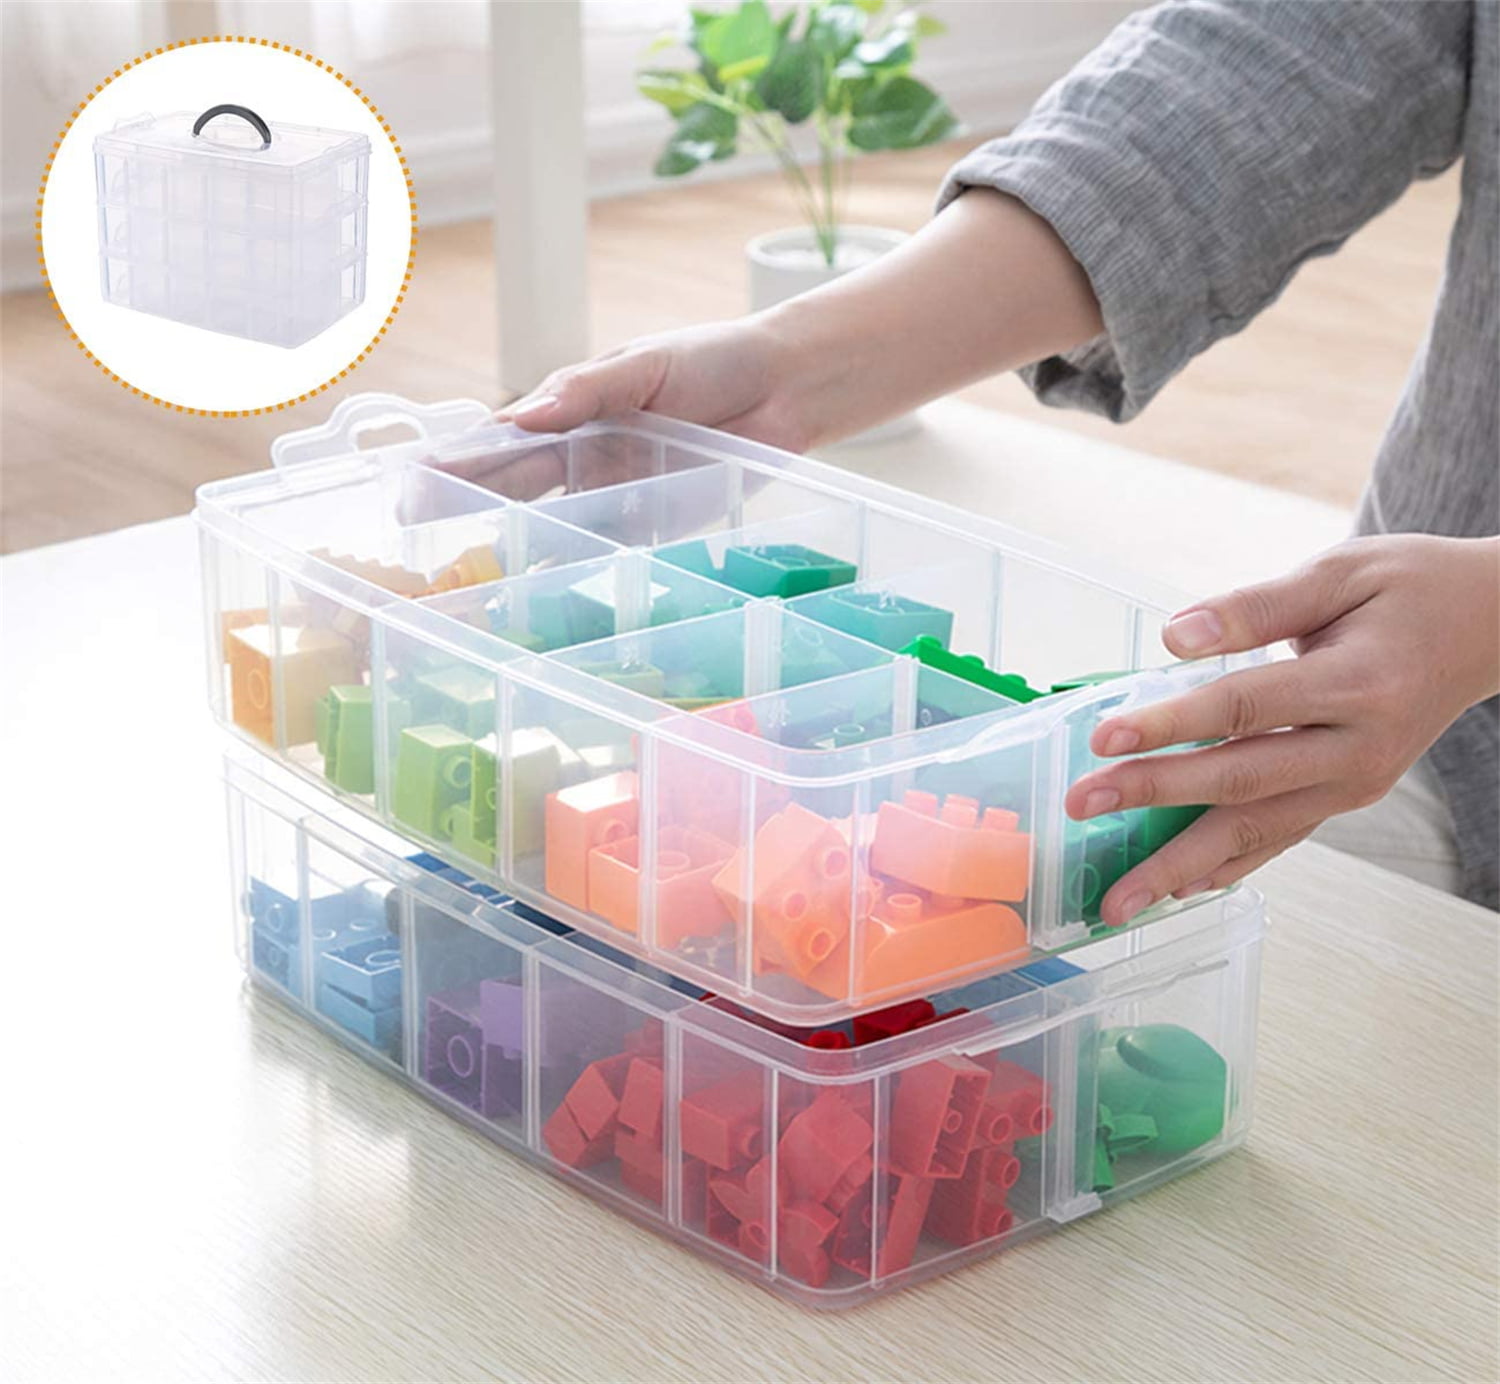 Guyuyii 3-Layer Stackable Craft Storage Containers - Plastic Craft Box Organizer with 30 Adjustable Compartments and Handle - Portable Beads Organizer